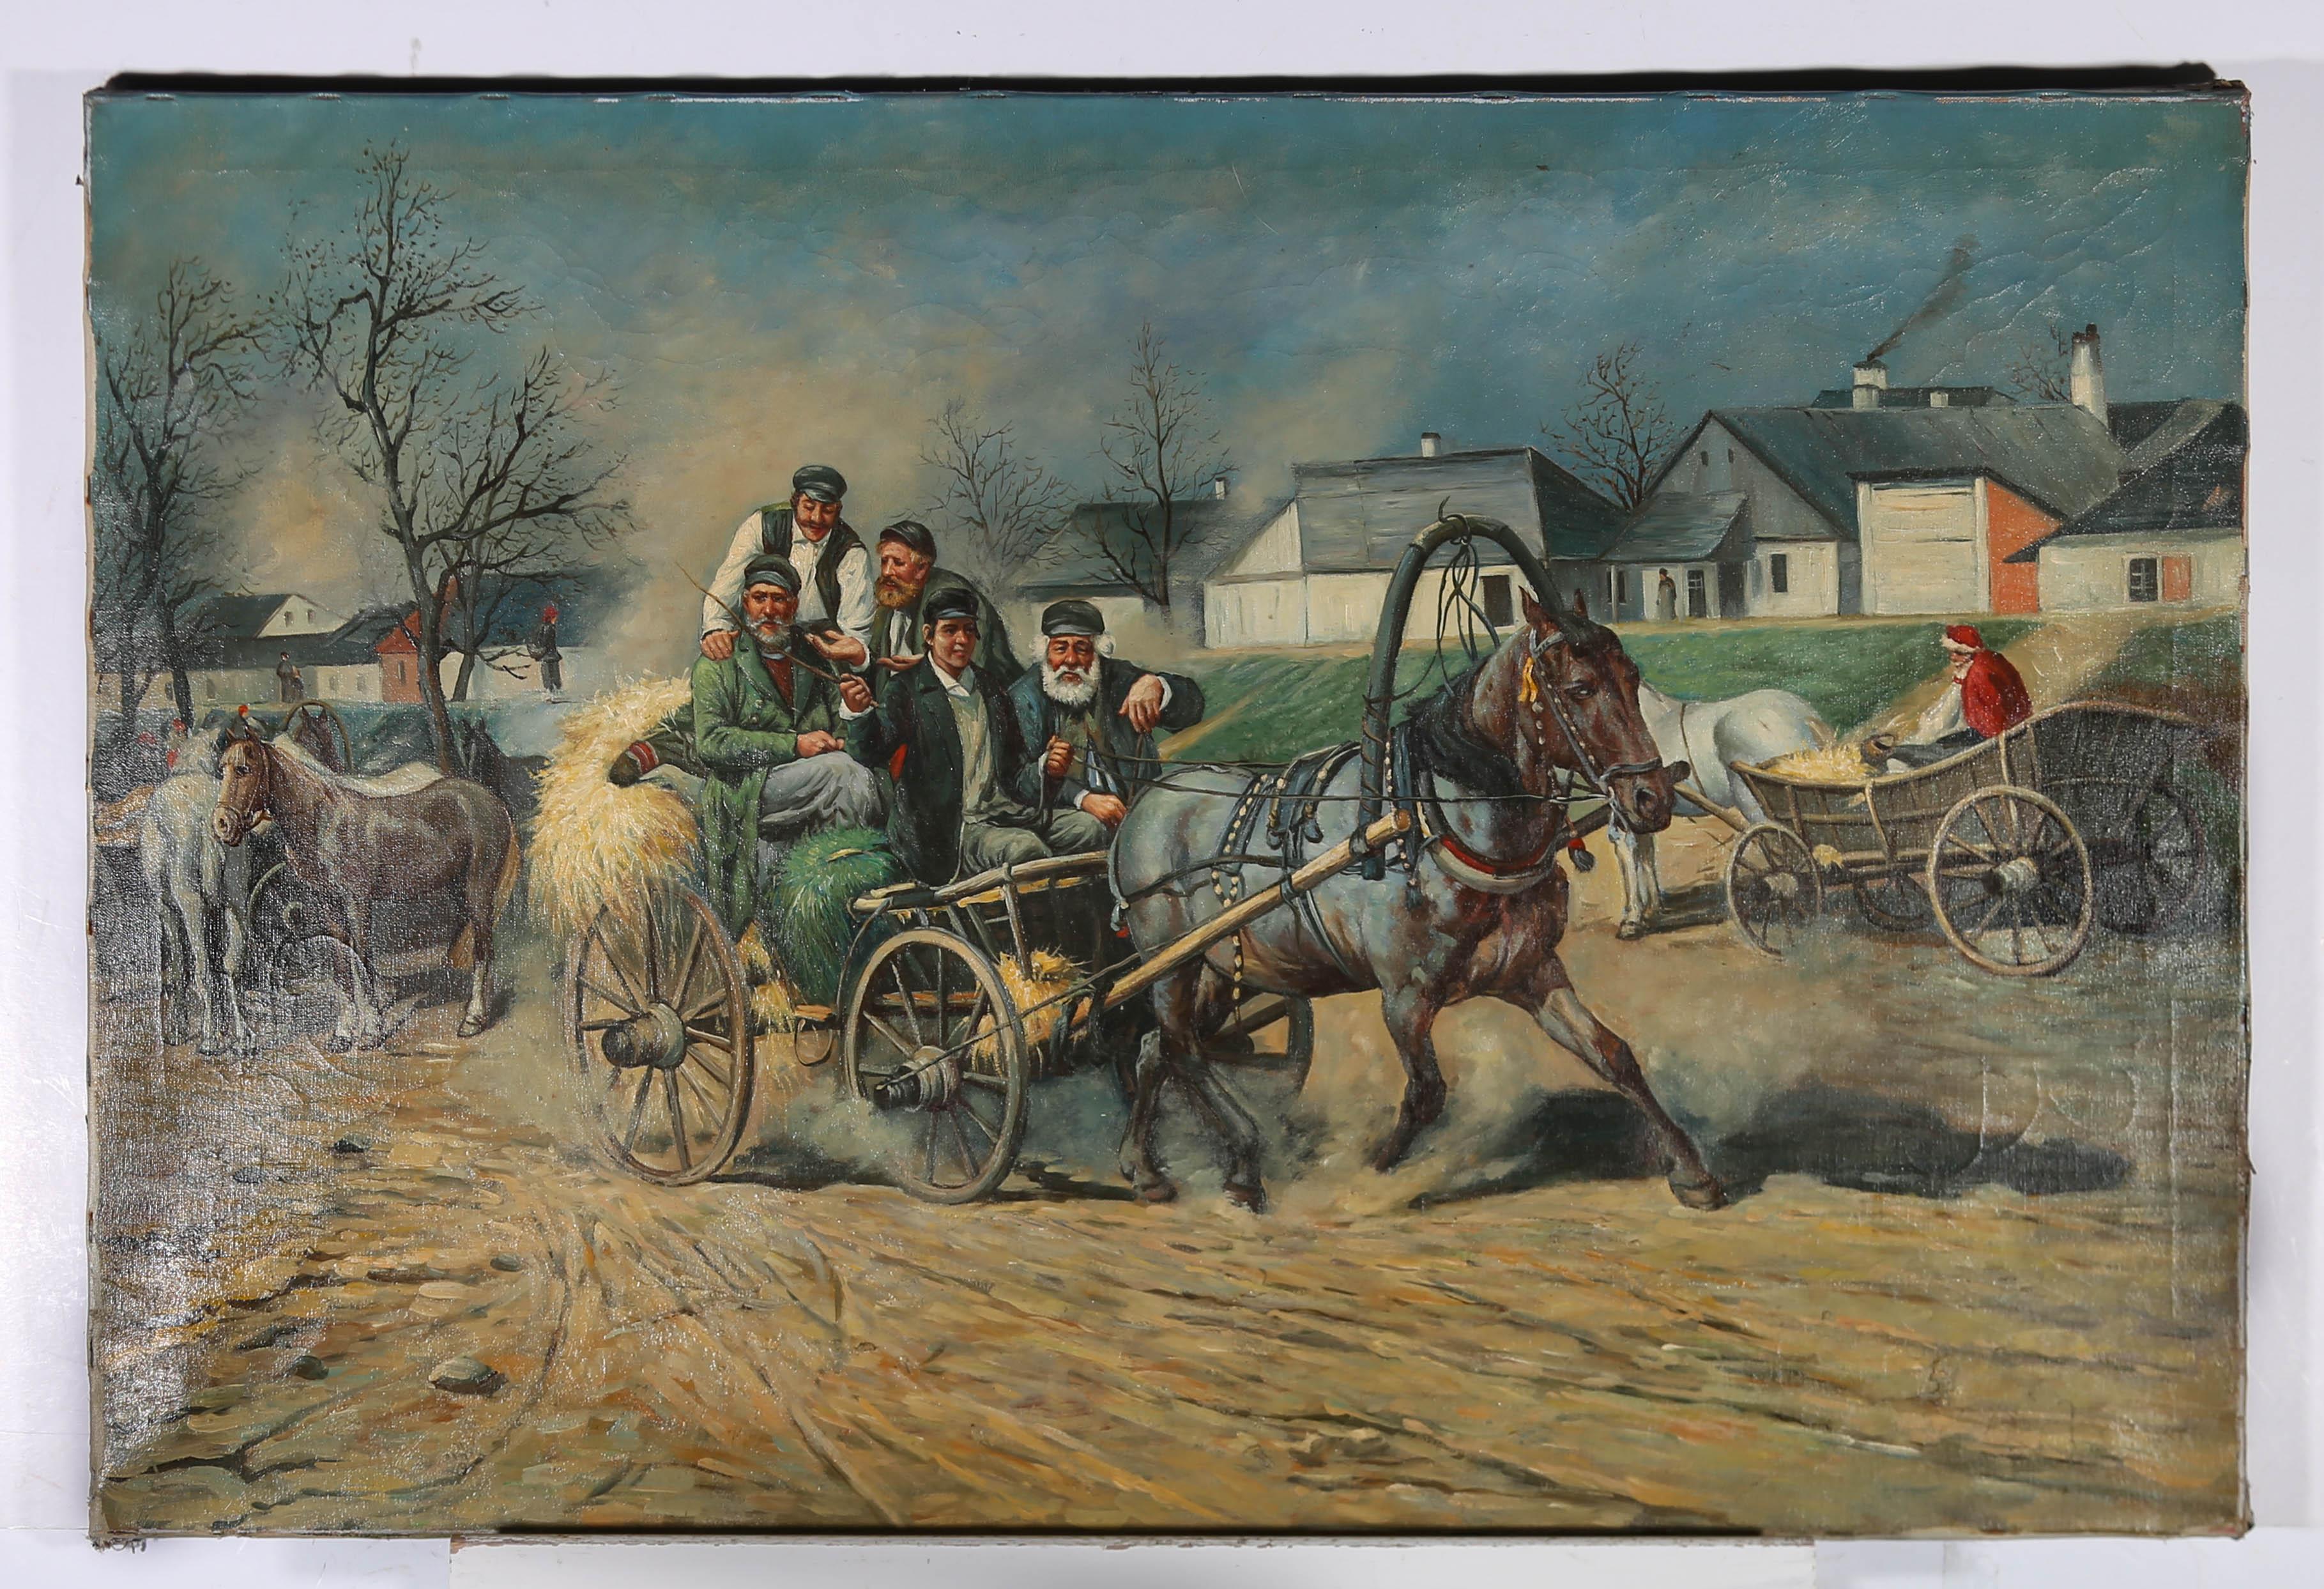 A dynamic and fun filled early 20th (c.1940) village scene, showing a group of men in a hay cart, being pulled by a handsome horse with elaborate harness. The horse is moving along the dirt road at speed, kicking up clouds of dust as he goes. The